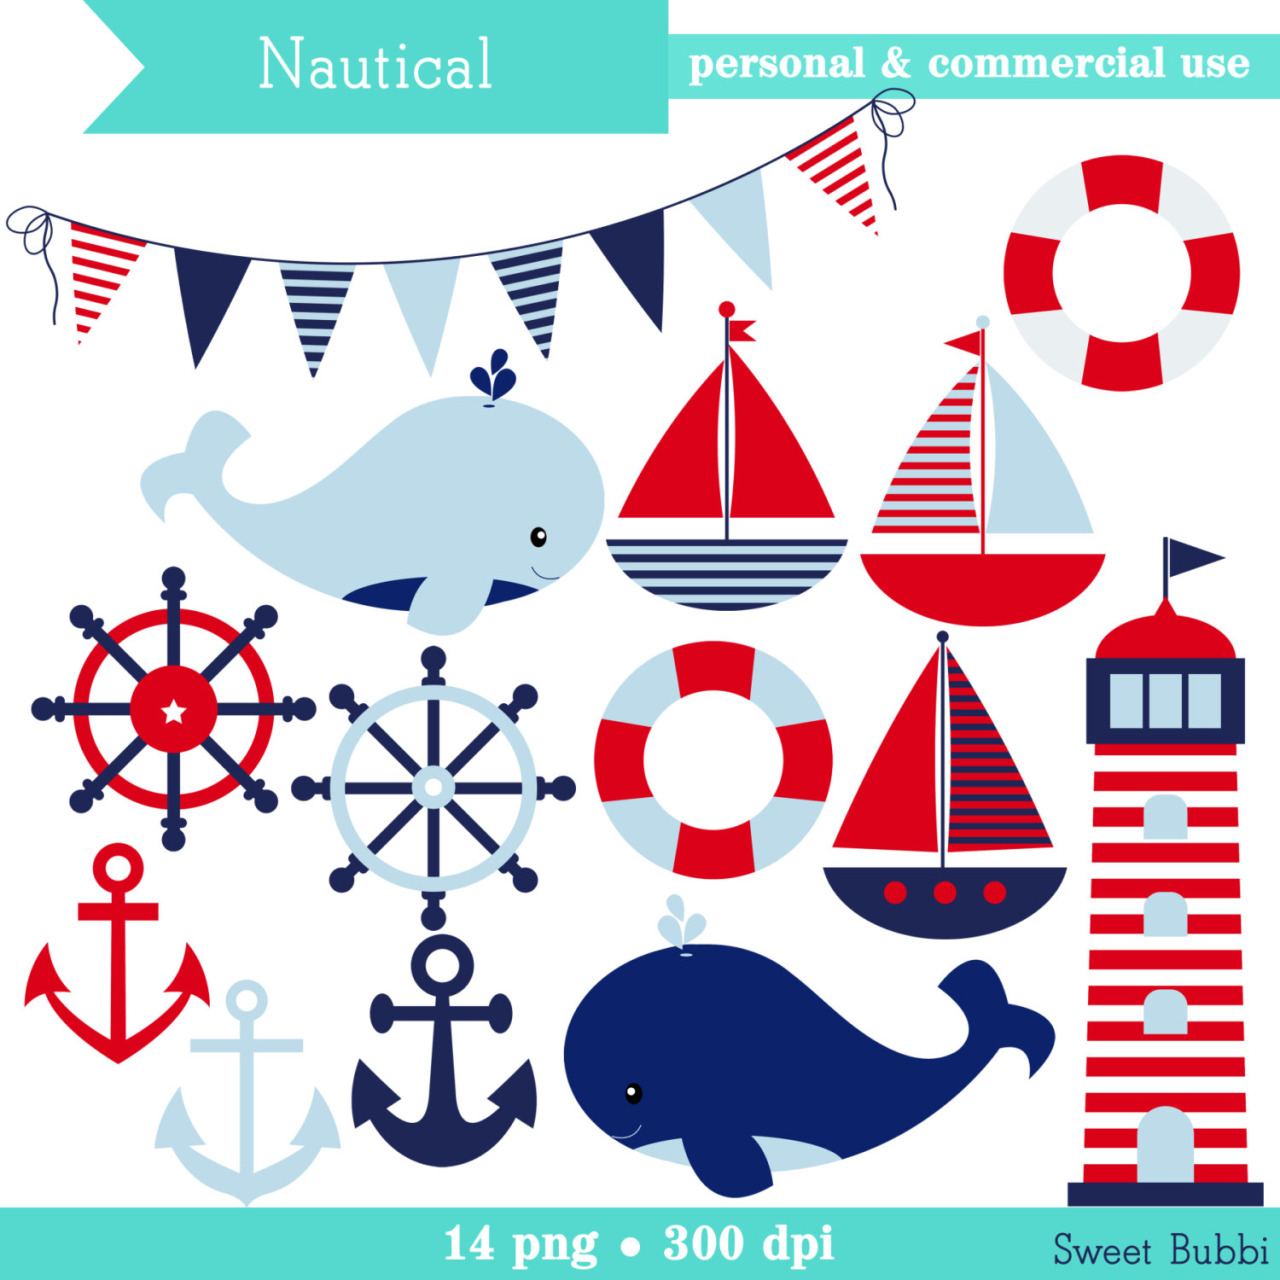 nautical clipart free download - photo #5